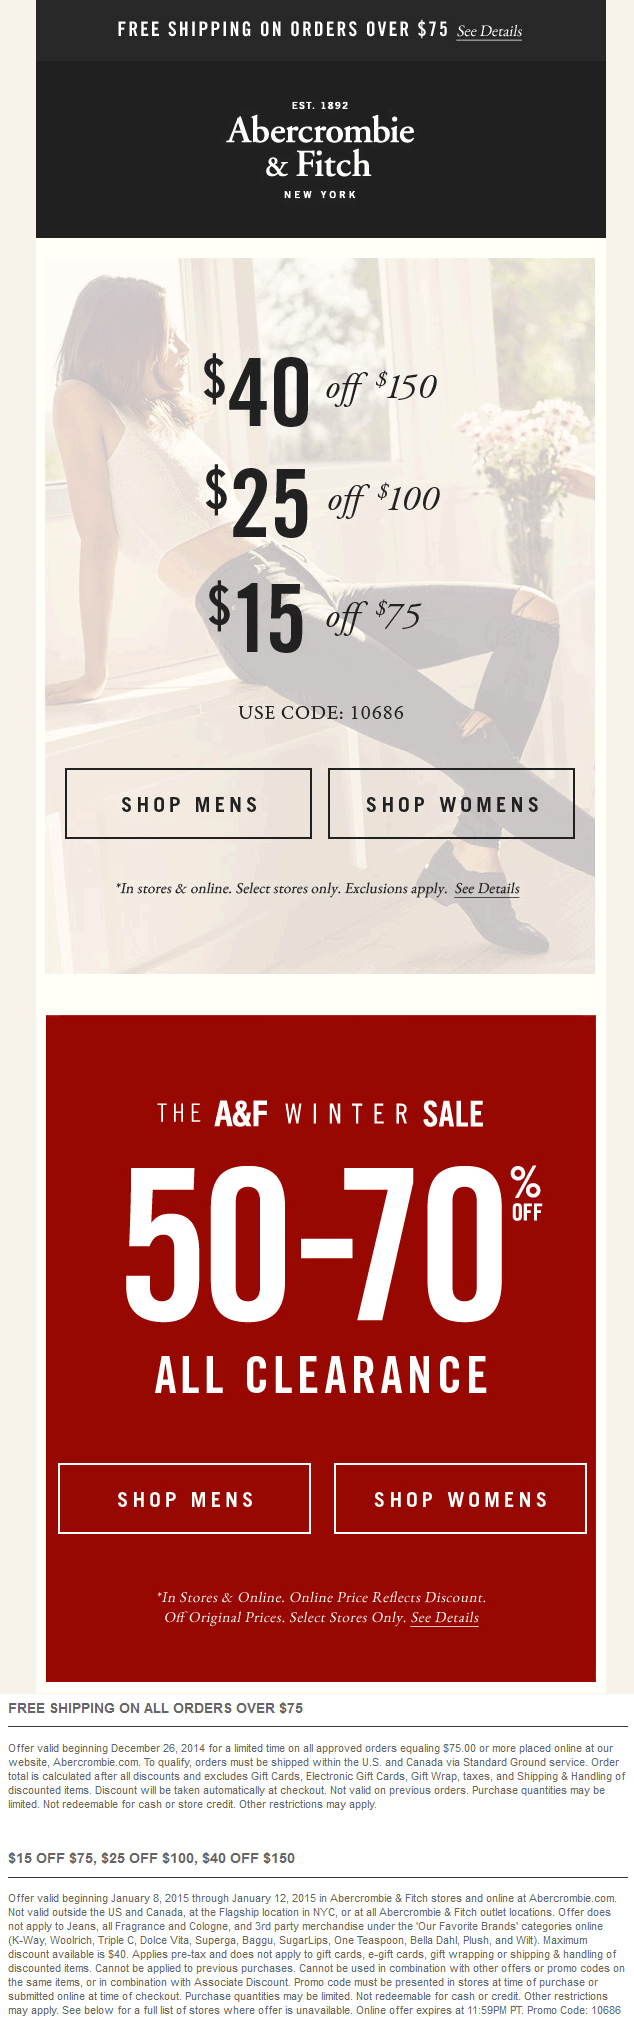 Abercrombie & Fitch Coupon April 2024 $15 off $75 & more at Abercrombie & Fitch, or online via promo code 10686